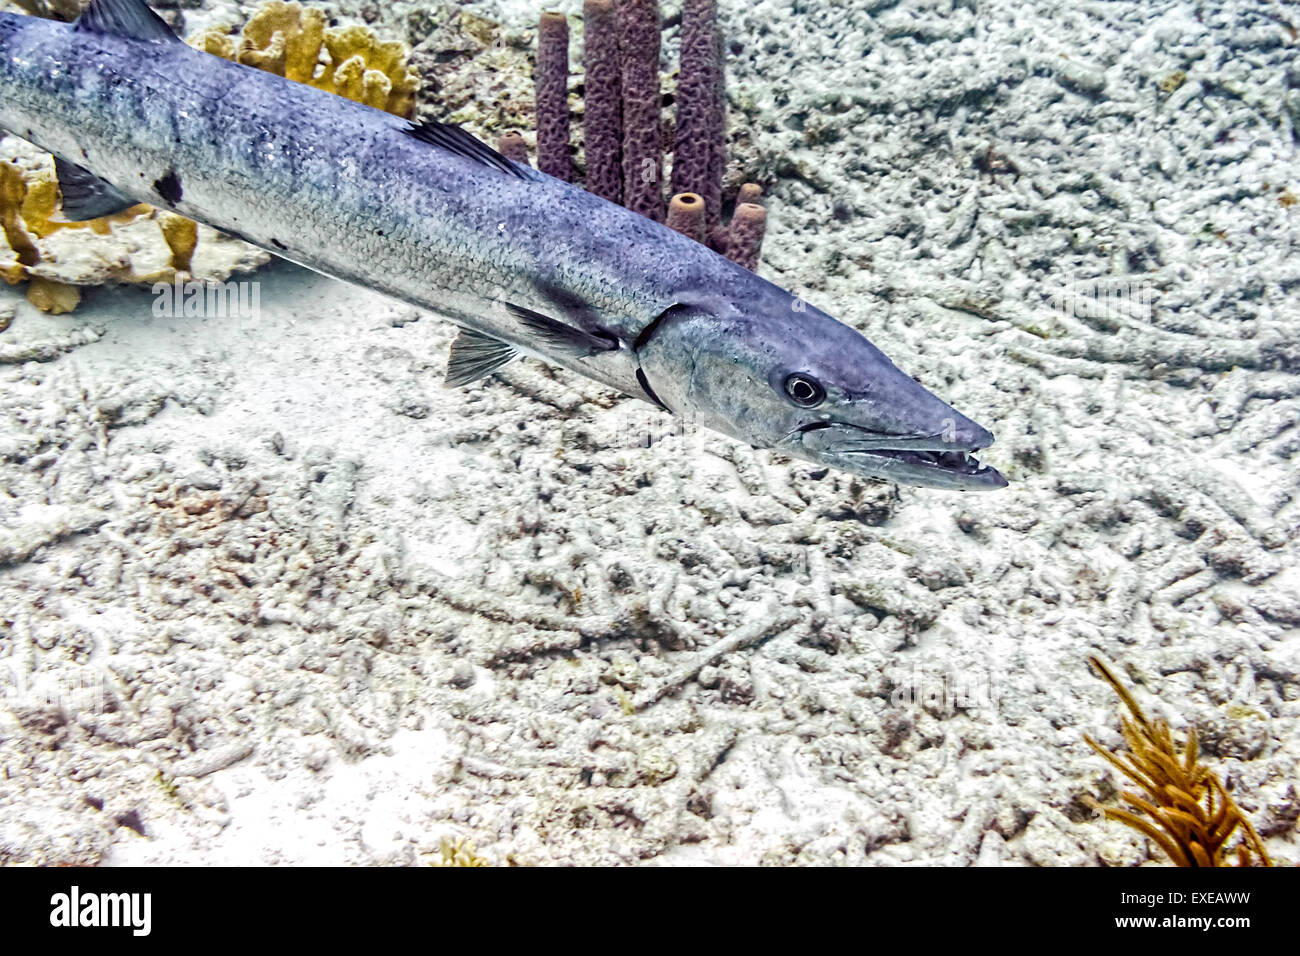 Great Barracuda on a Cleaning Station at Sharon's Serenity in Klein Bonaire, Bonaire Stock Photo